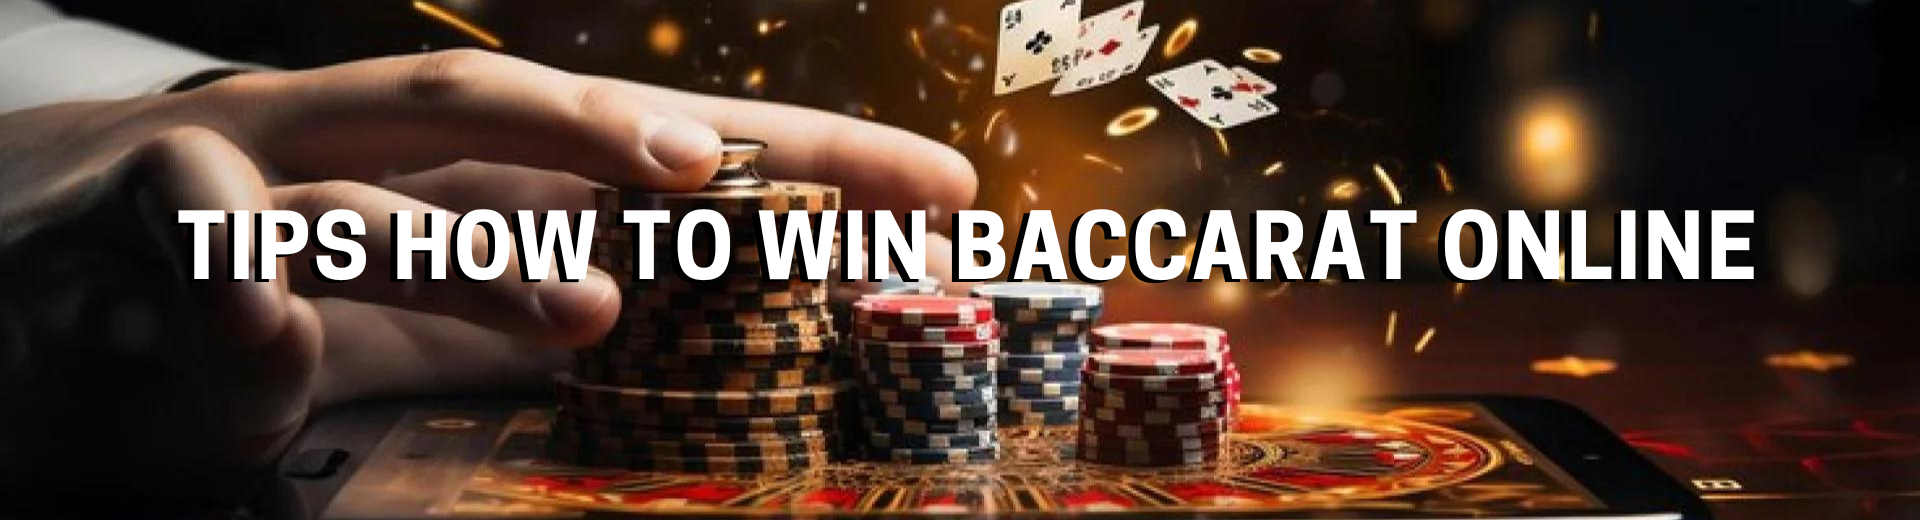 Tips How to Win Baccarat Online